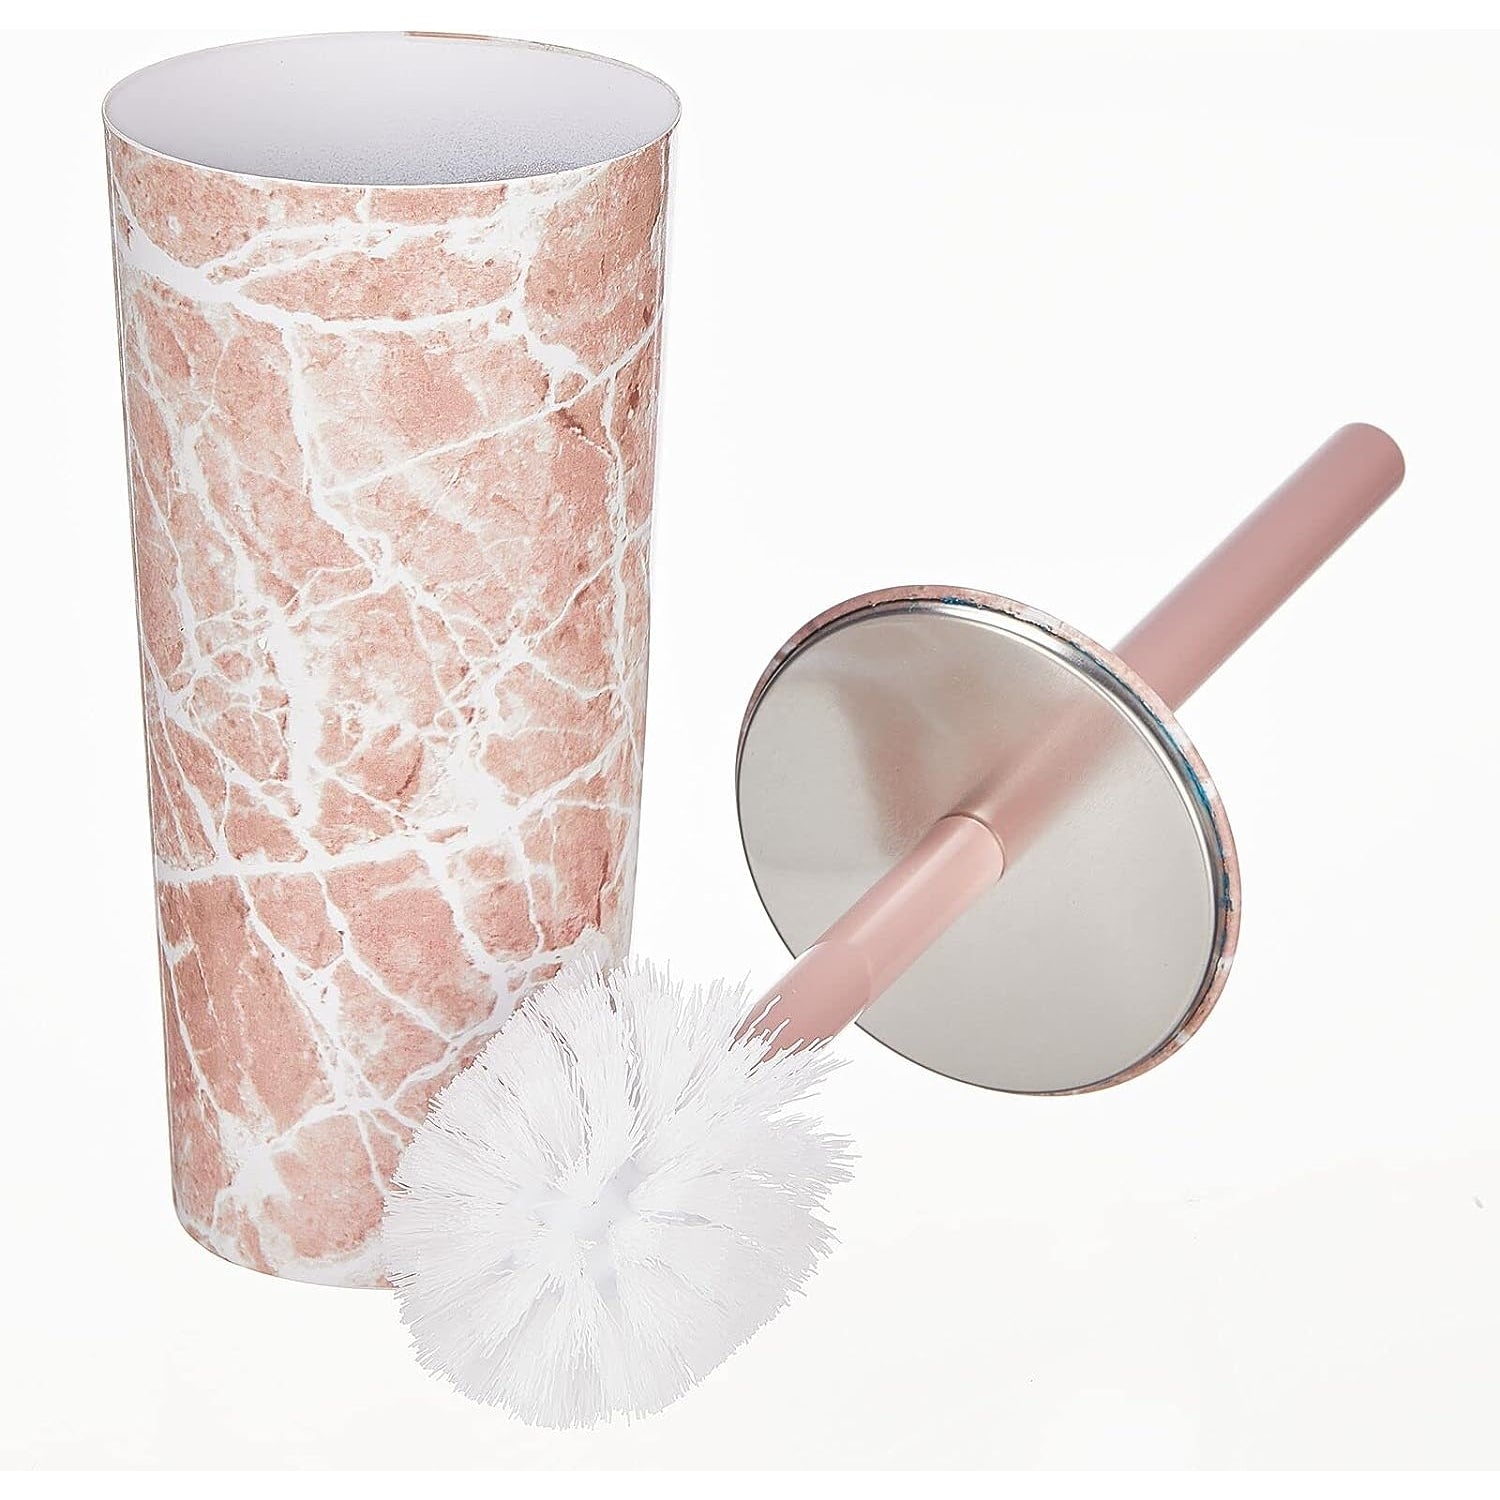 mDesign Steel Toilet Bowl Brush and Holder Combo, Mirri Collection - Pink Marble